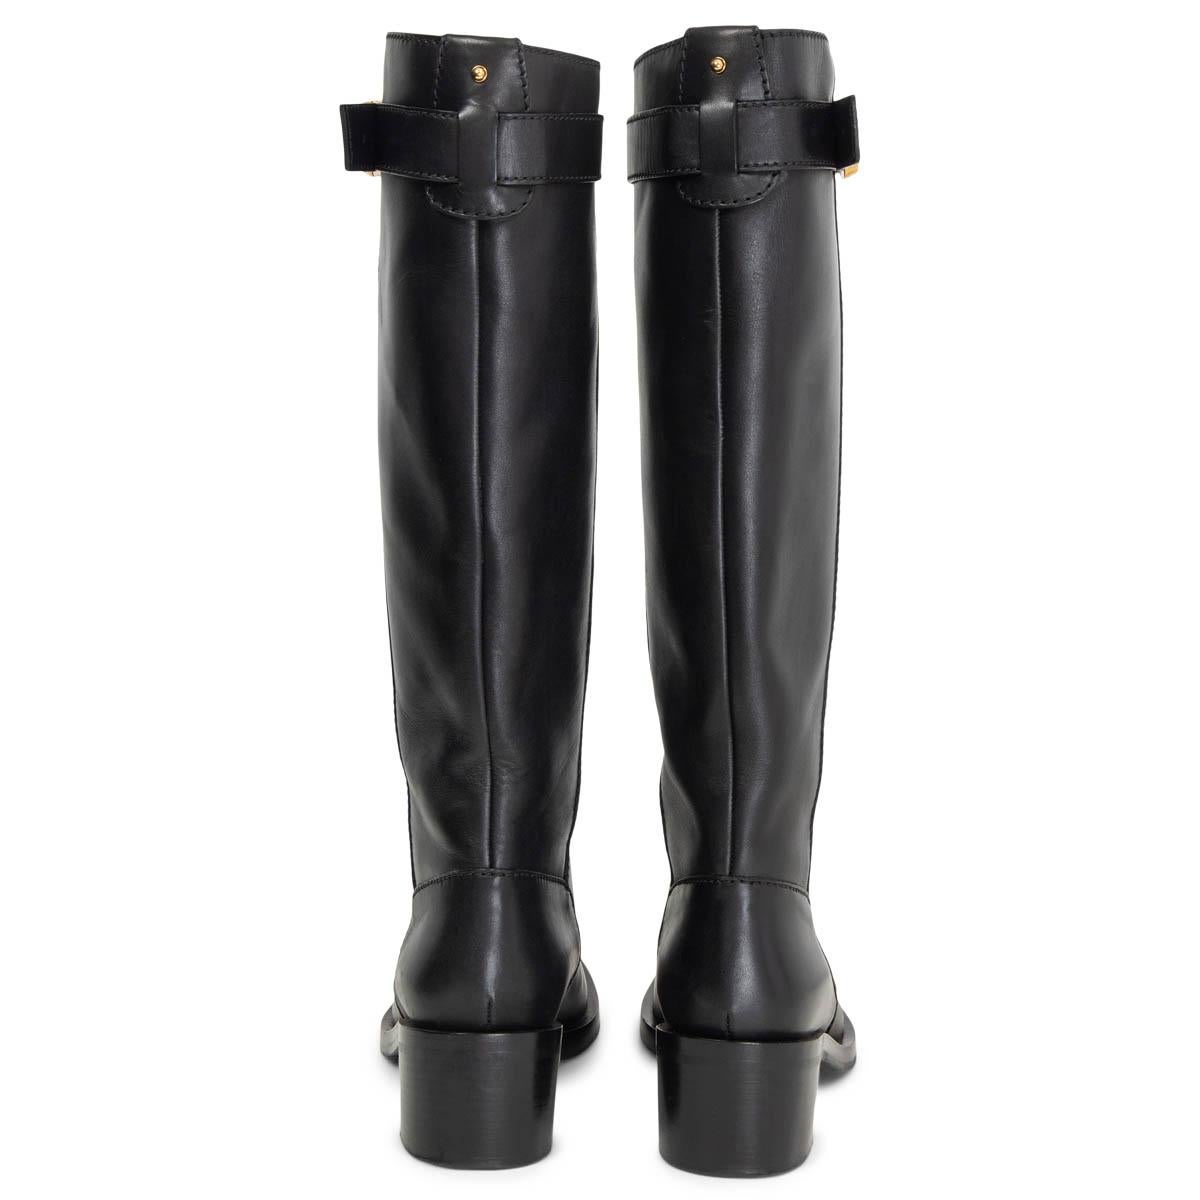 Black GUCCI black leather GG BUCKLE RIDING Boots Shoes 36.5